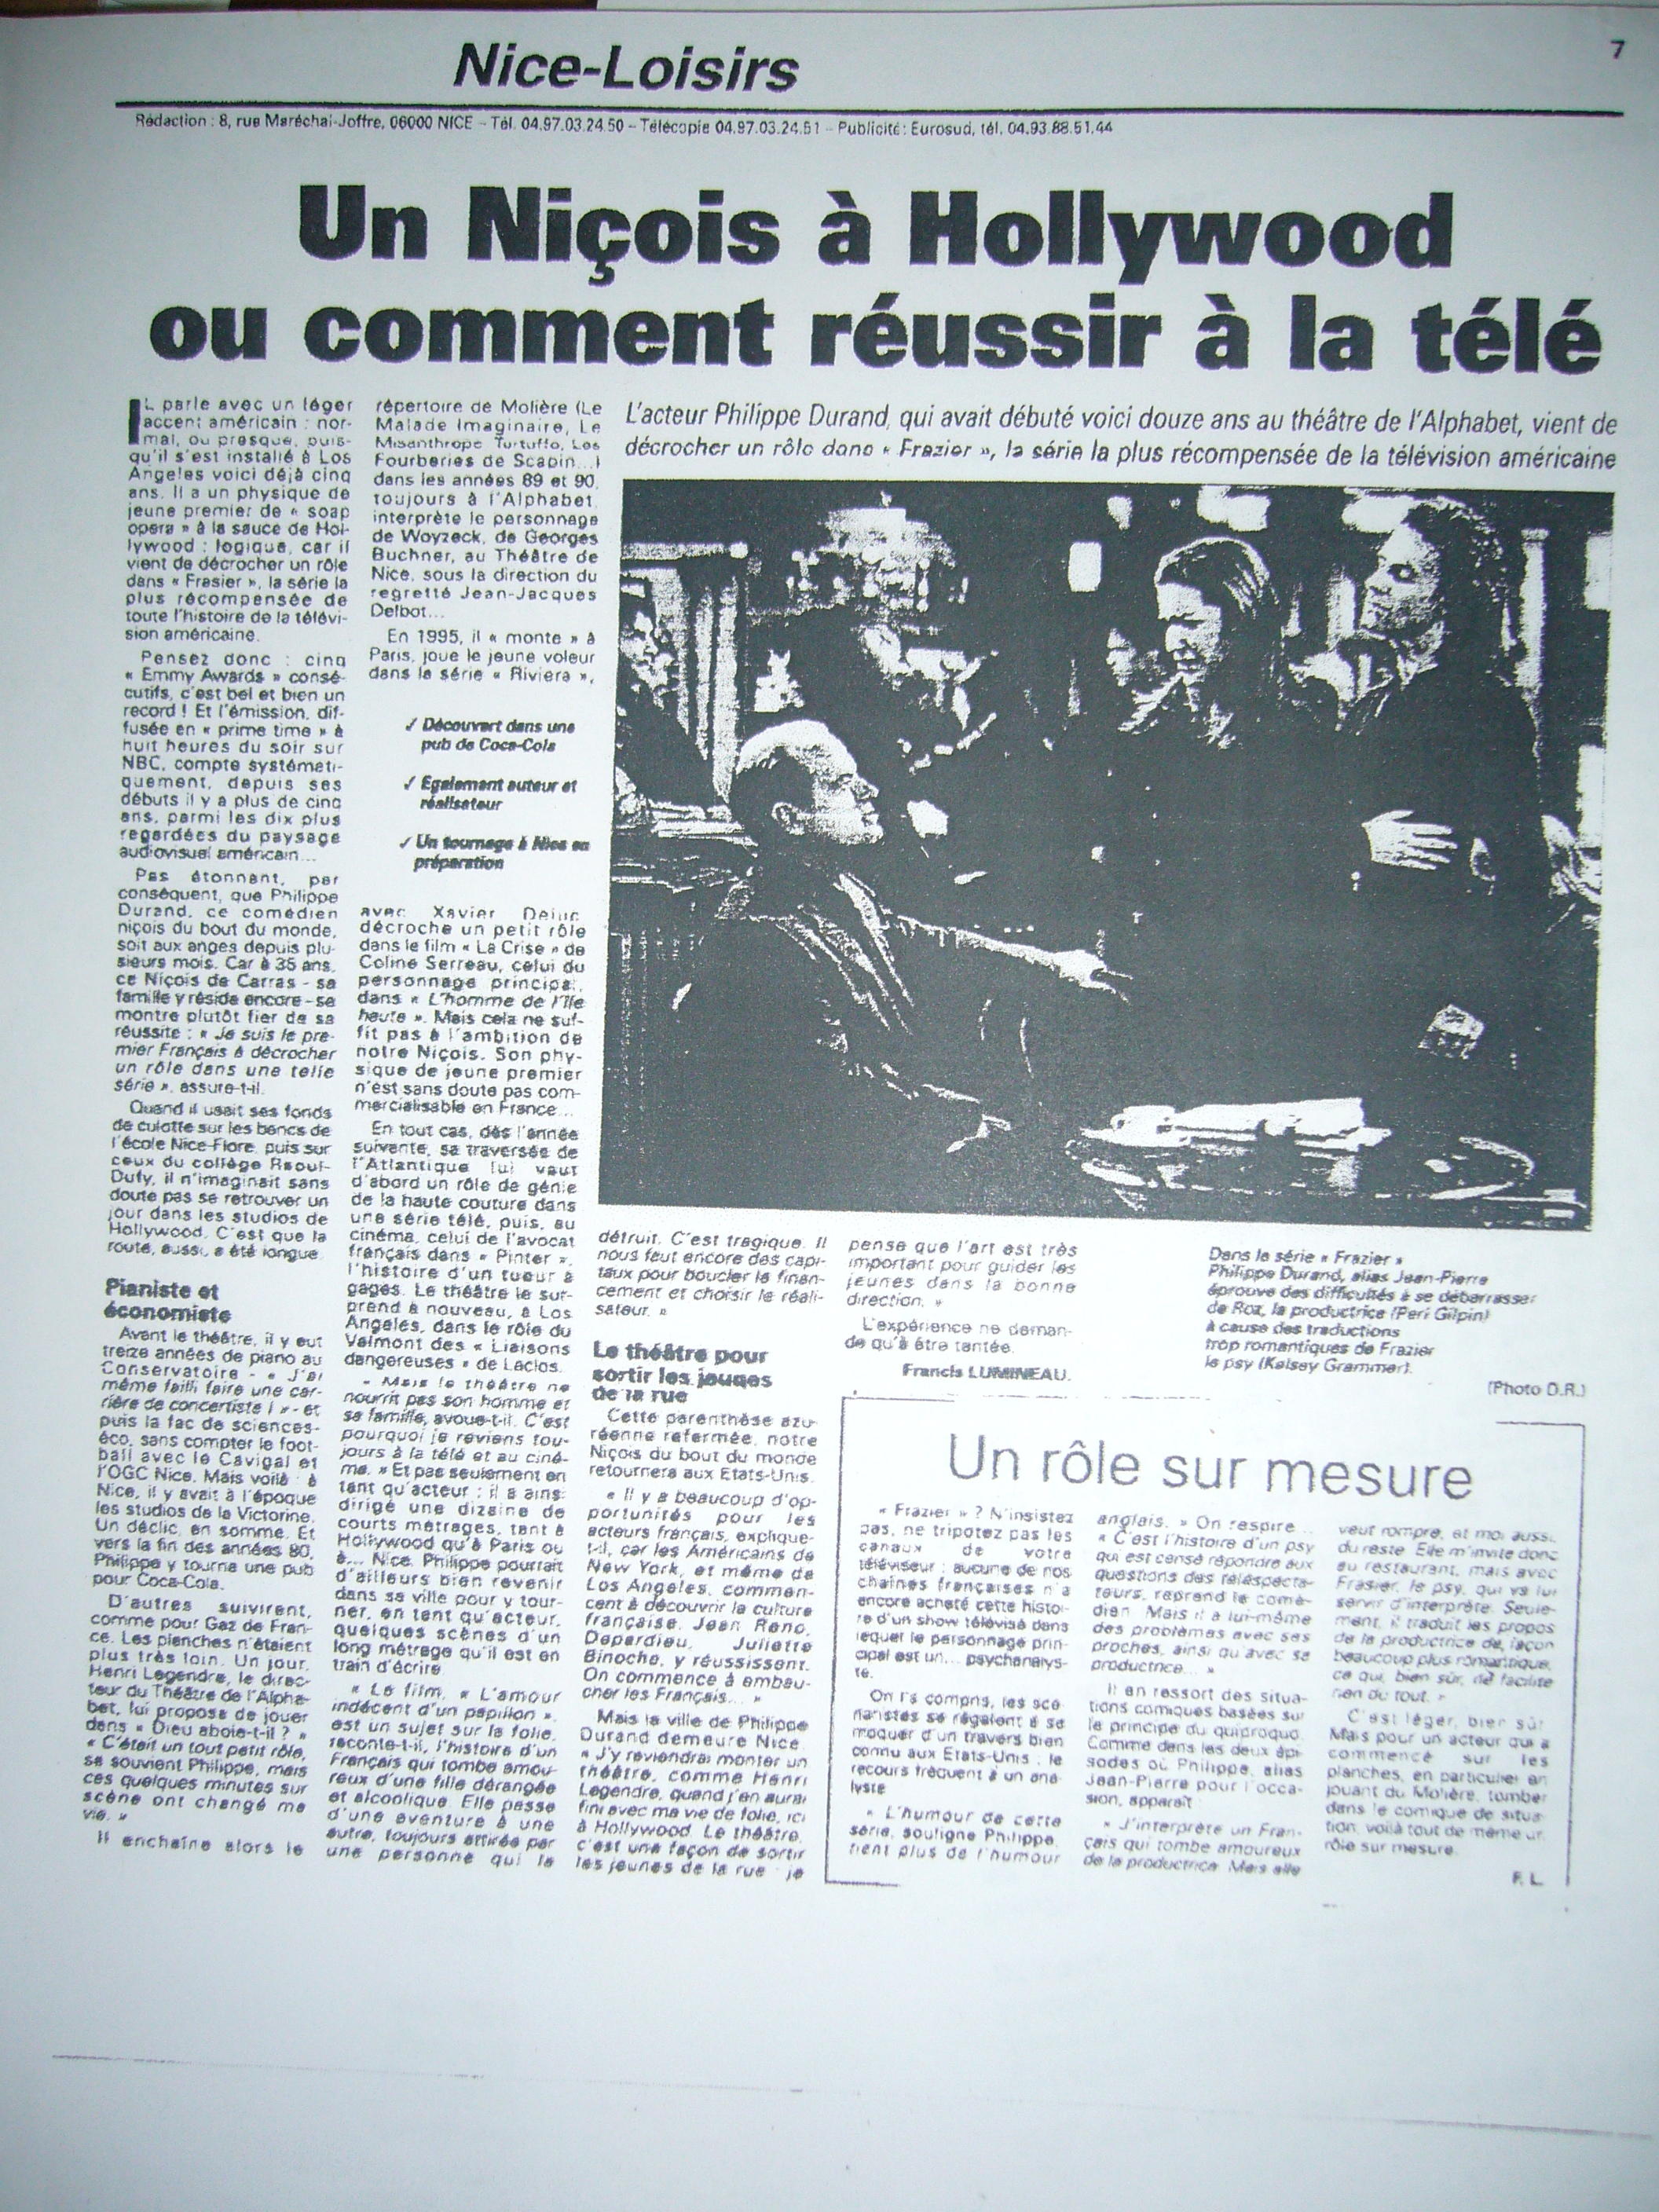 Frasier Article in France about Philippe Durand and his role in Frasier